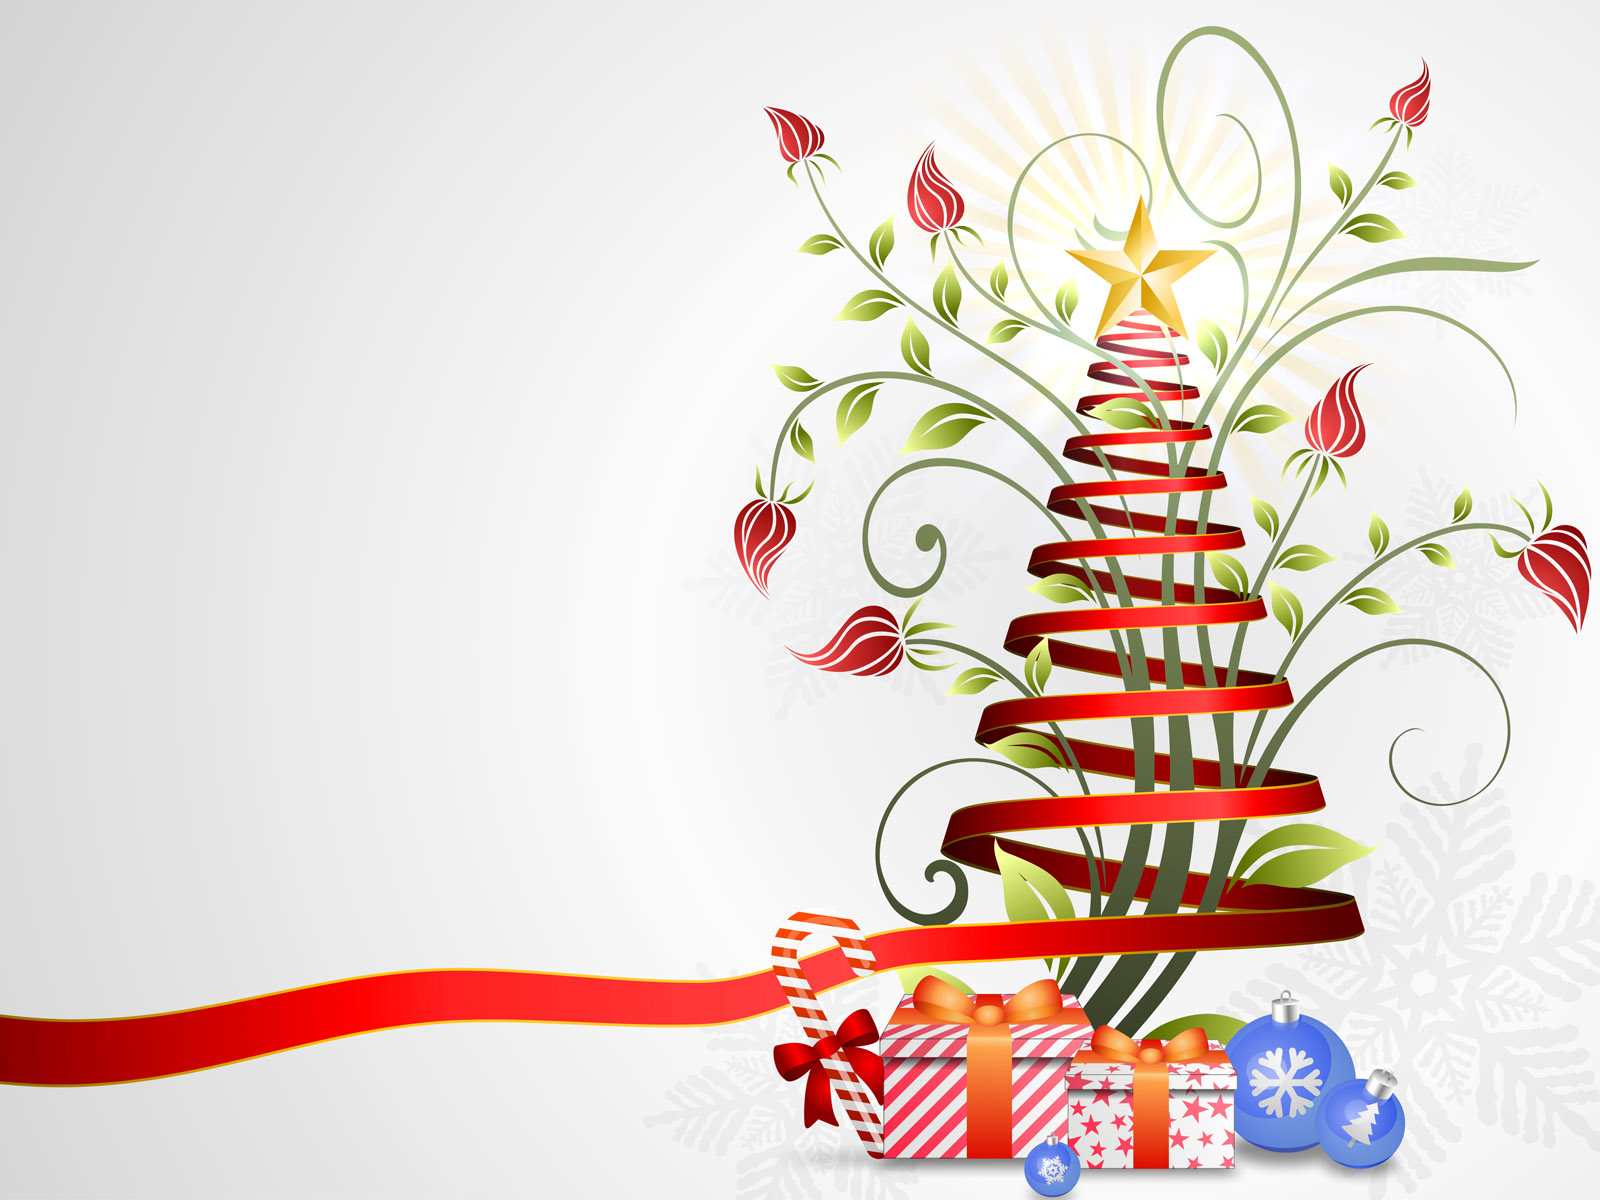 christmas clipart borders backgrounds - photo #39